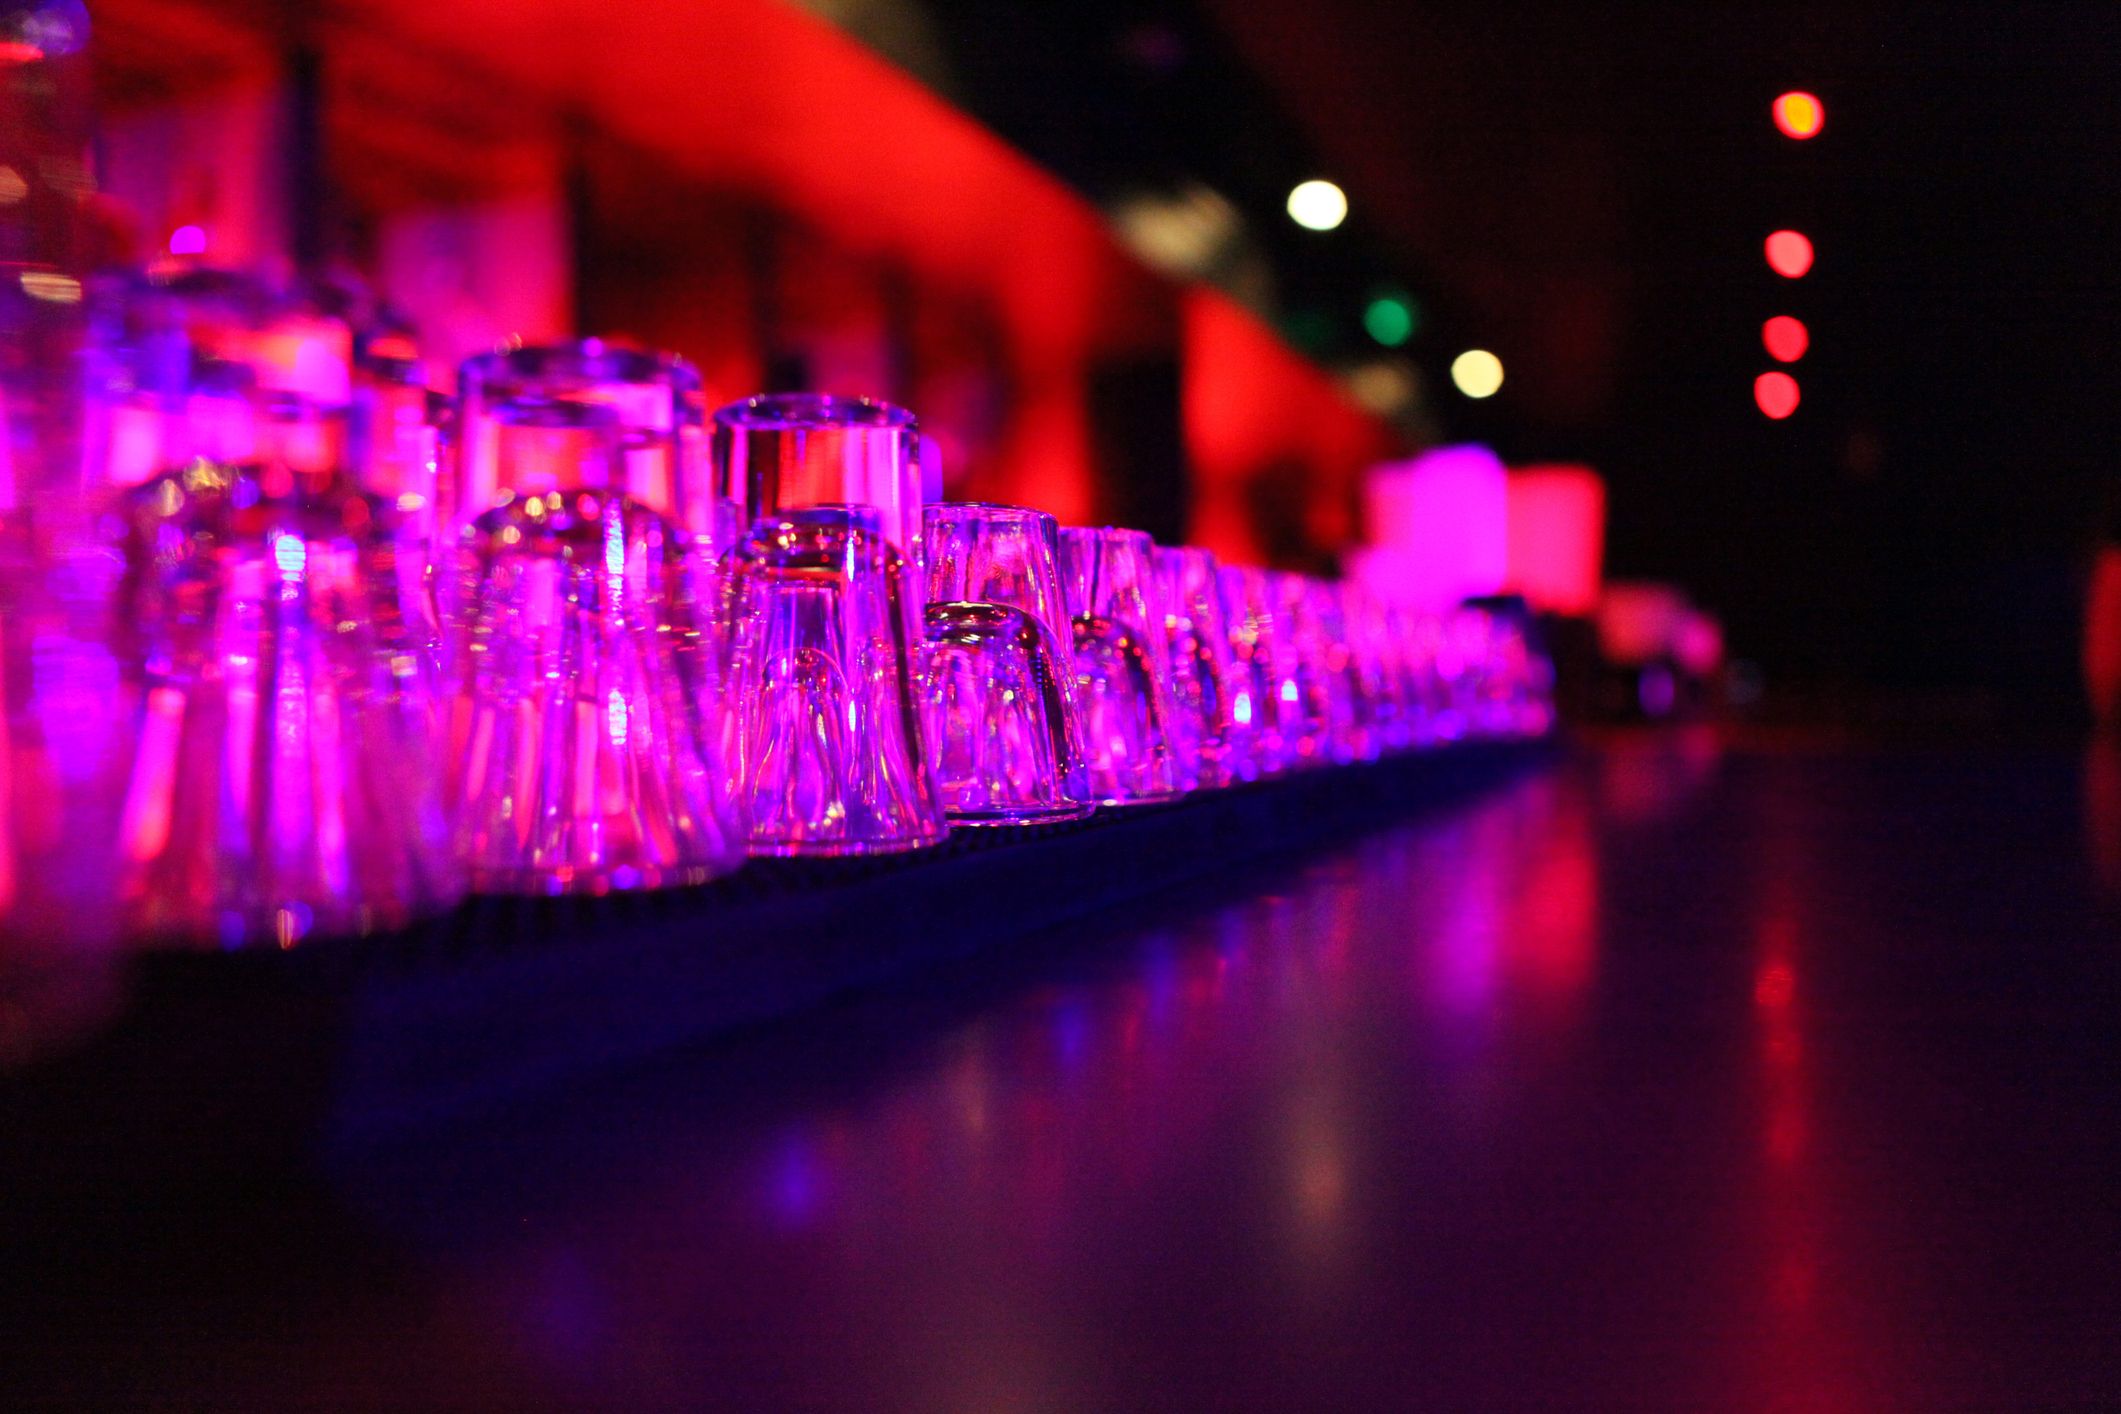 Crime at nightclubs: the cities where nightlife crime is highest